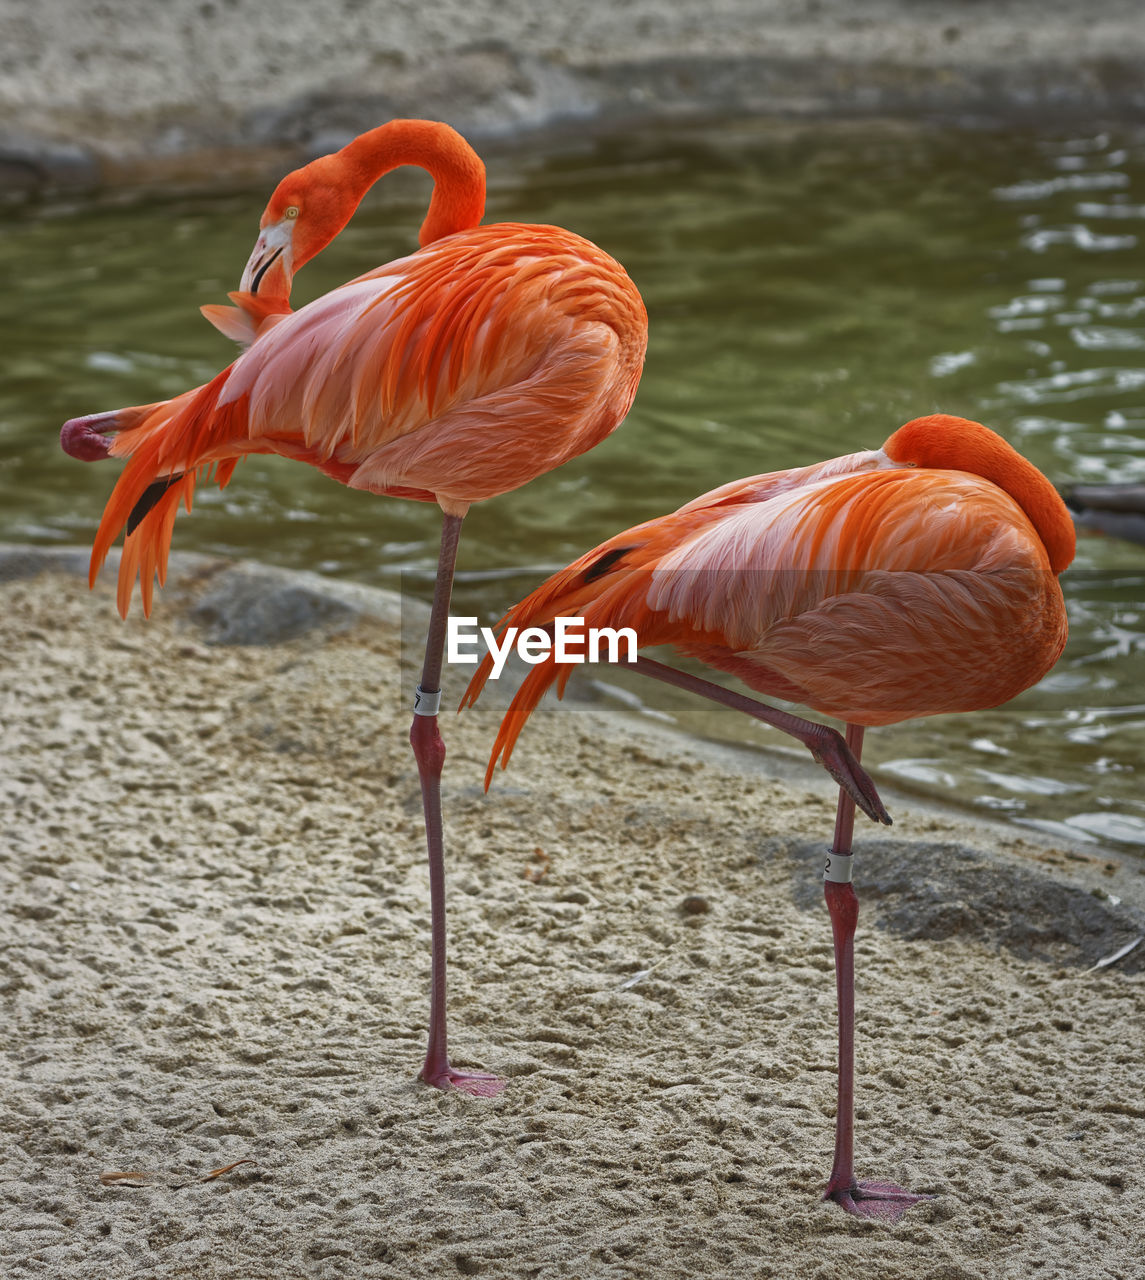 Two flamingo birds standing on one foot